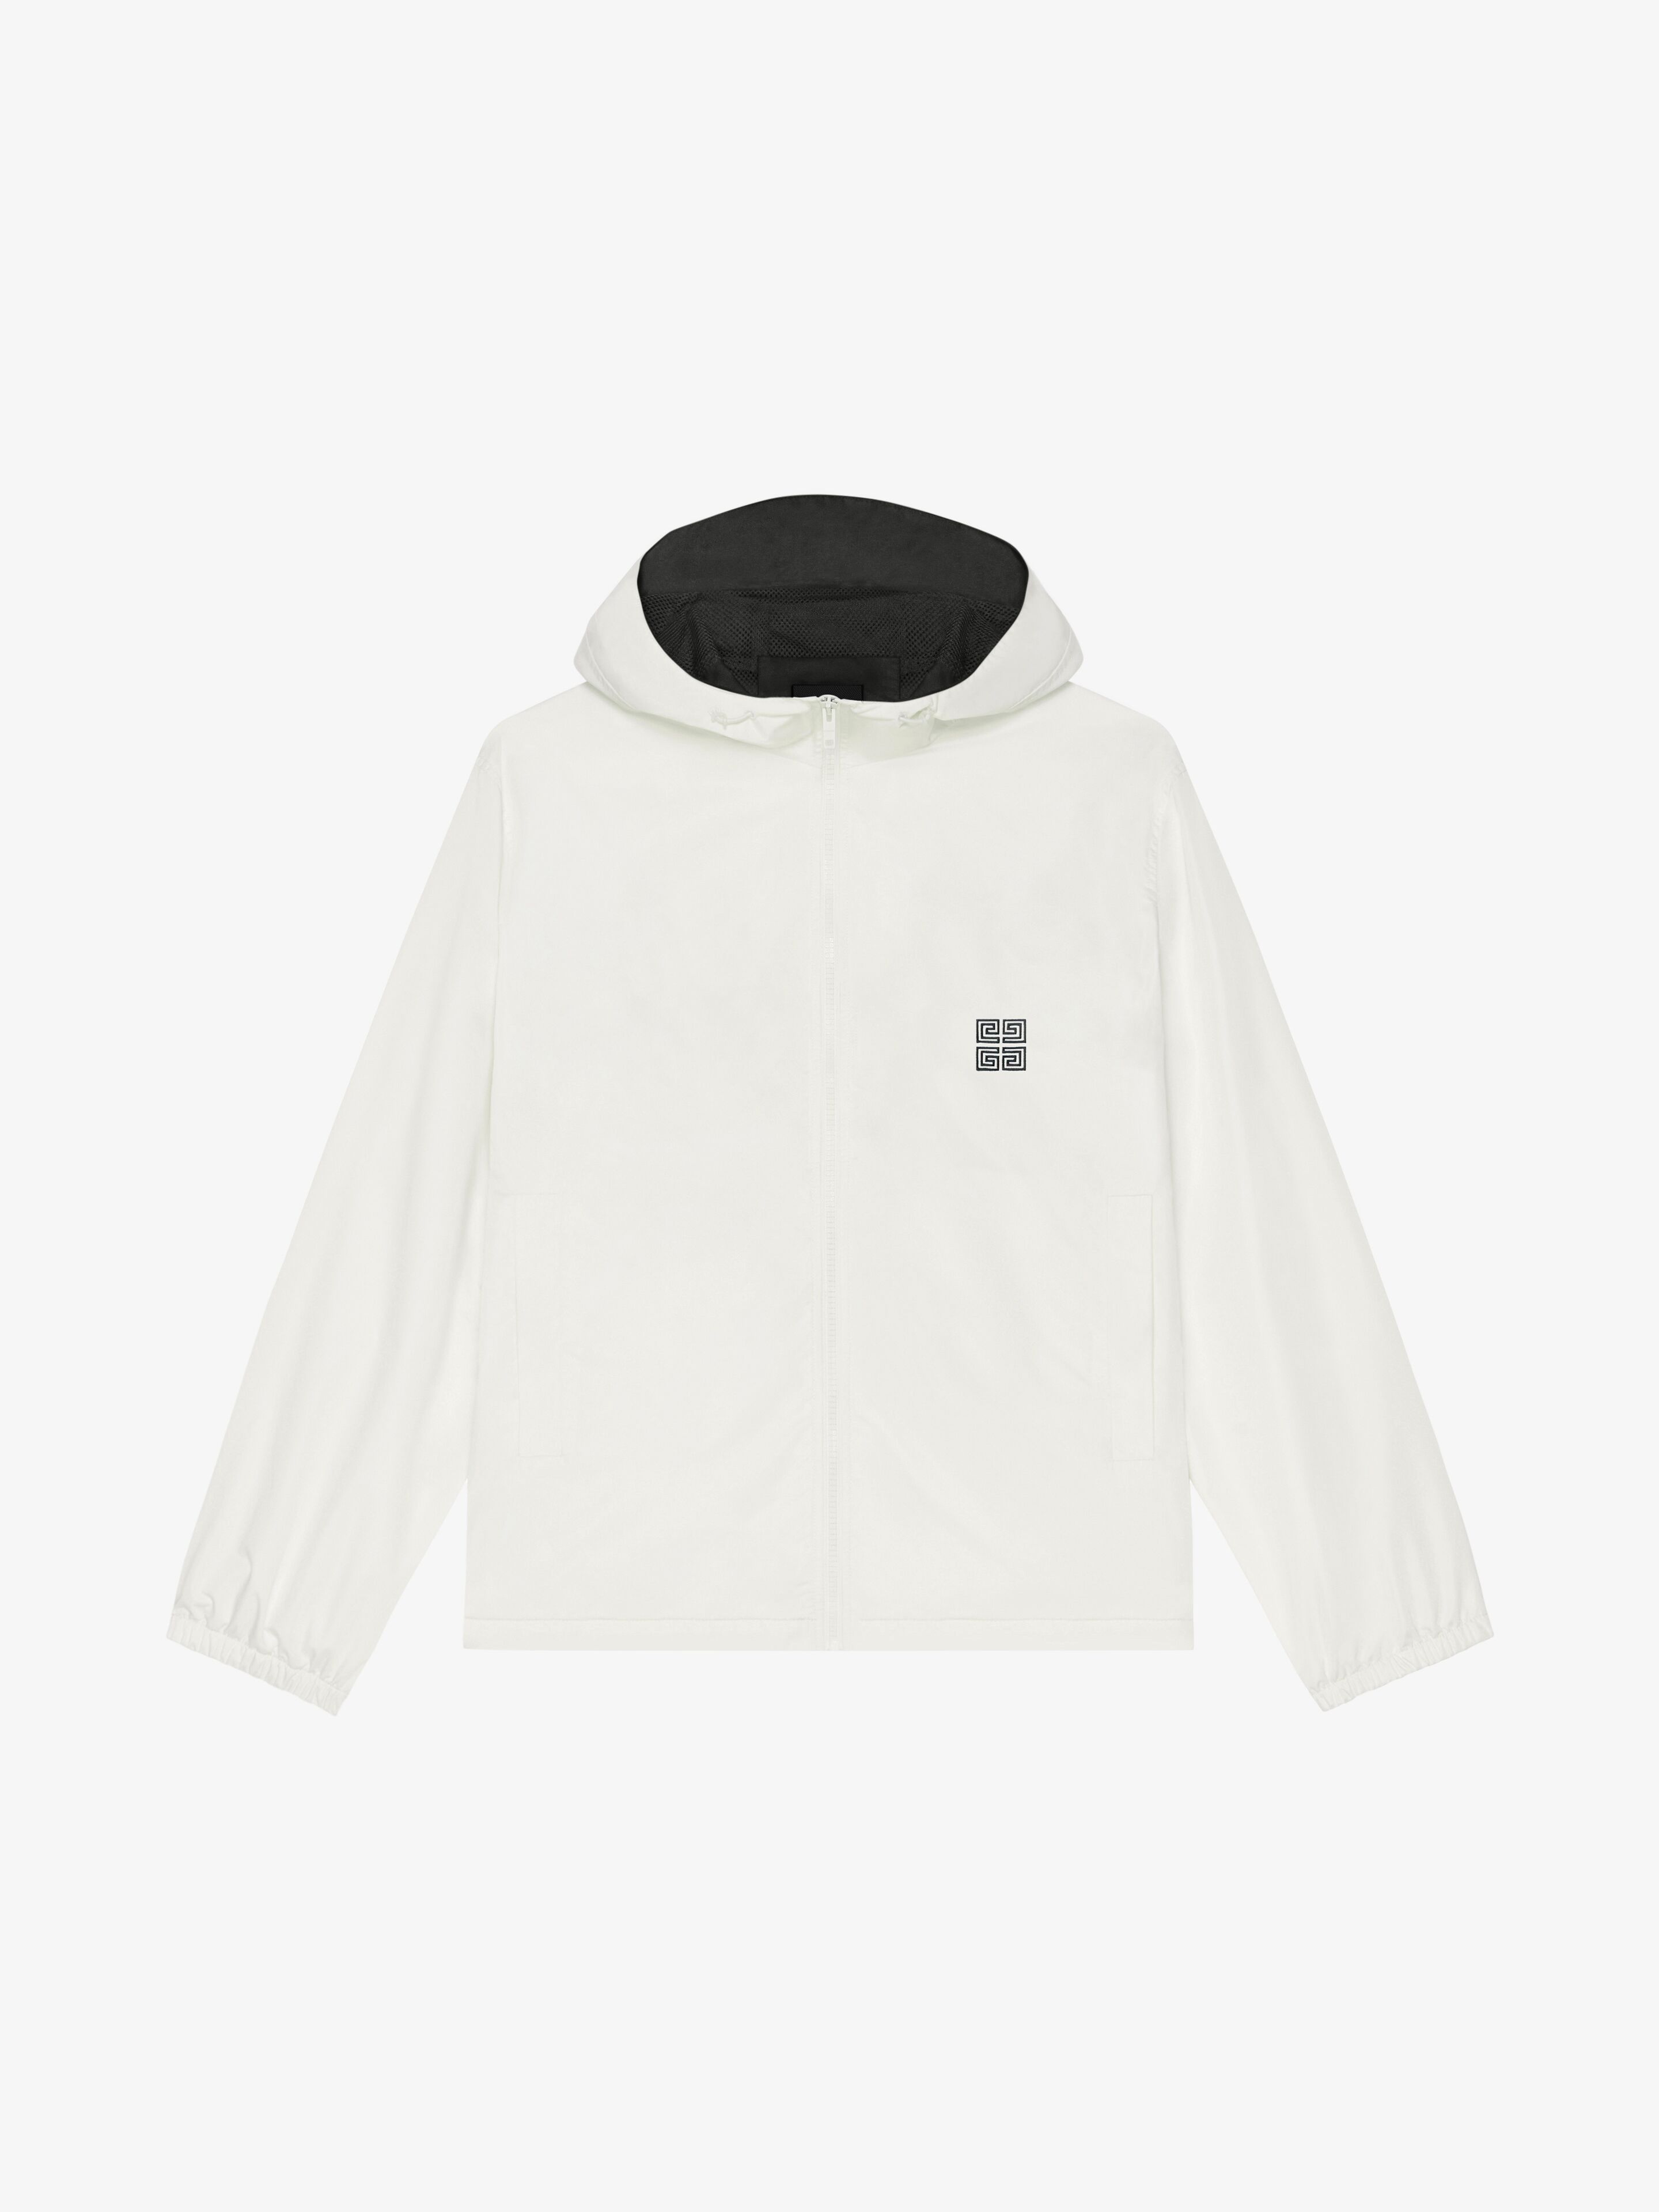 Shop Givenchy Reversible Football Parka In Fleece In Black/white